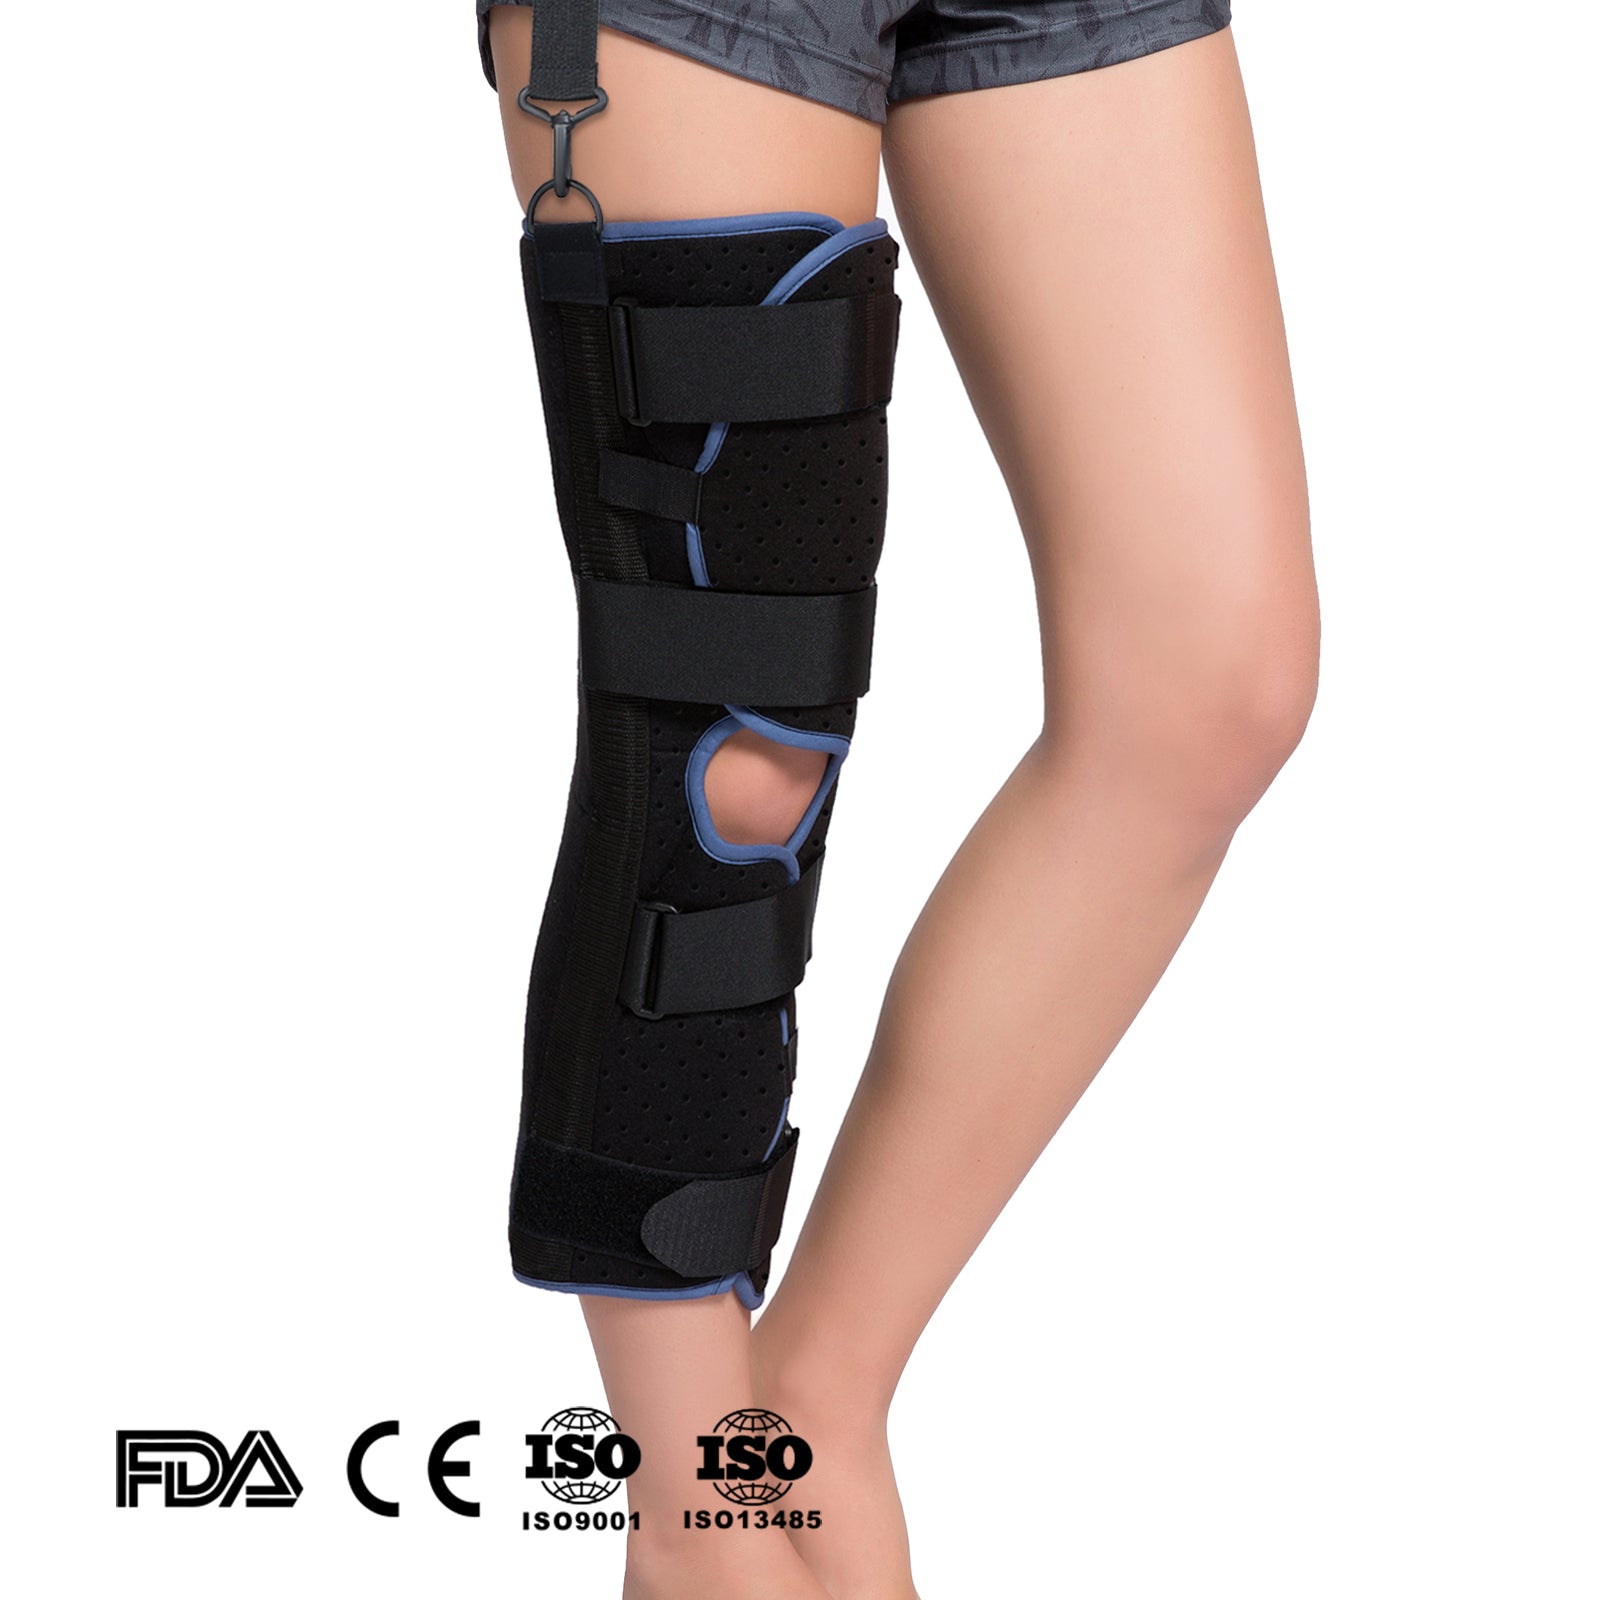 Knee Immobilizer Full Leg Brace - Breathable and Lightweight Splint  Orthopedic Guard Protector for Knee Pre-and Postoperative & Injury or